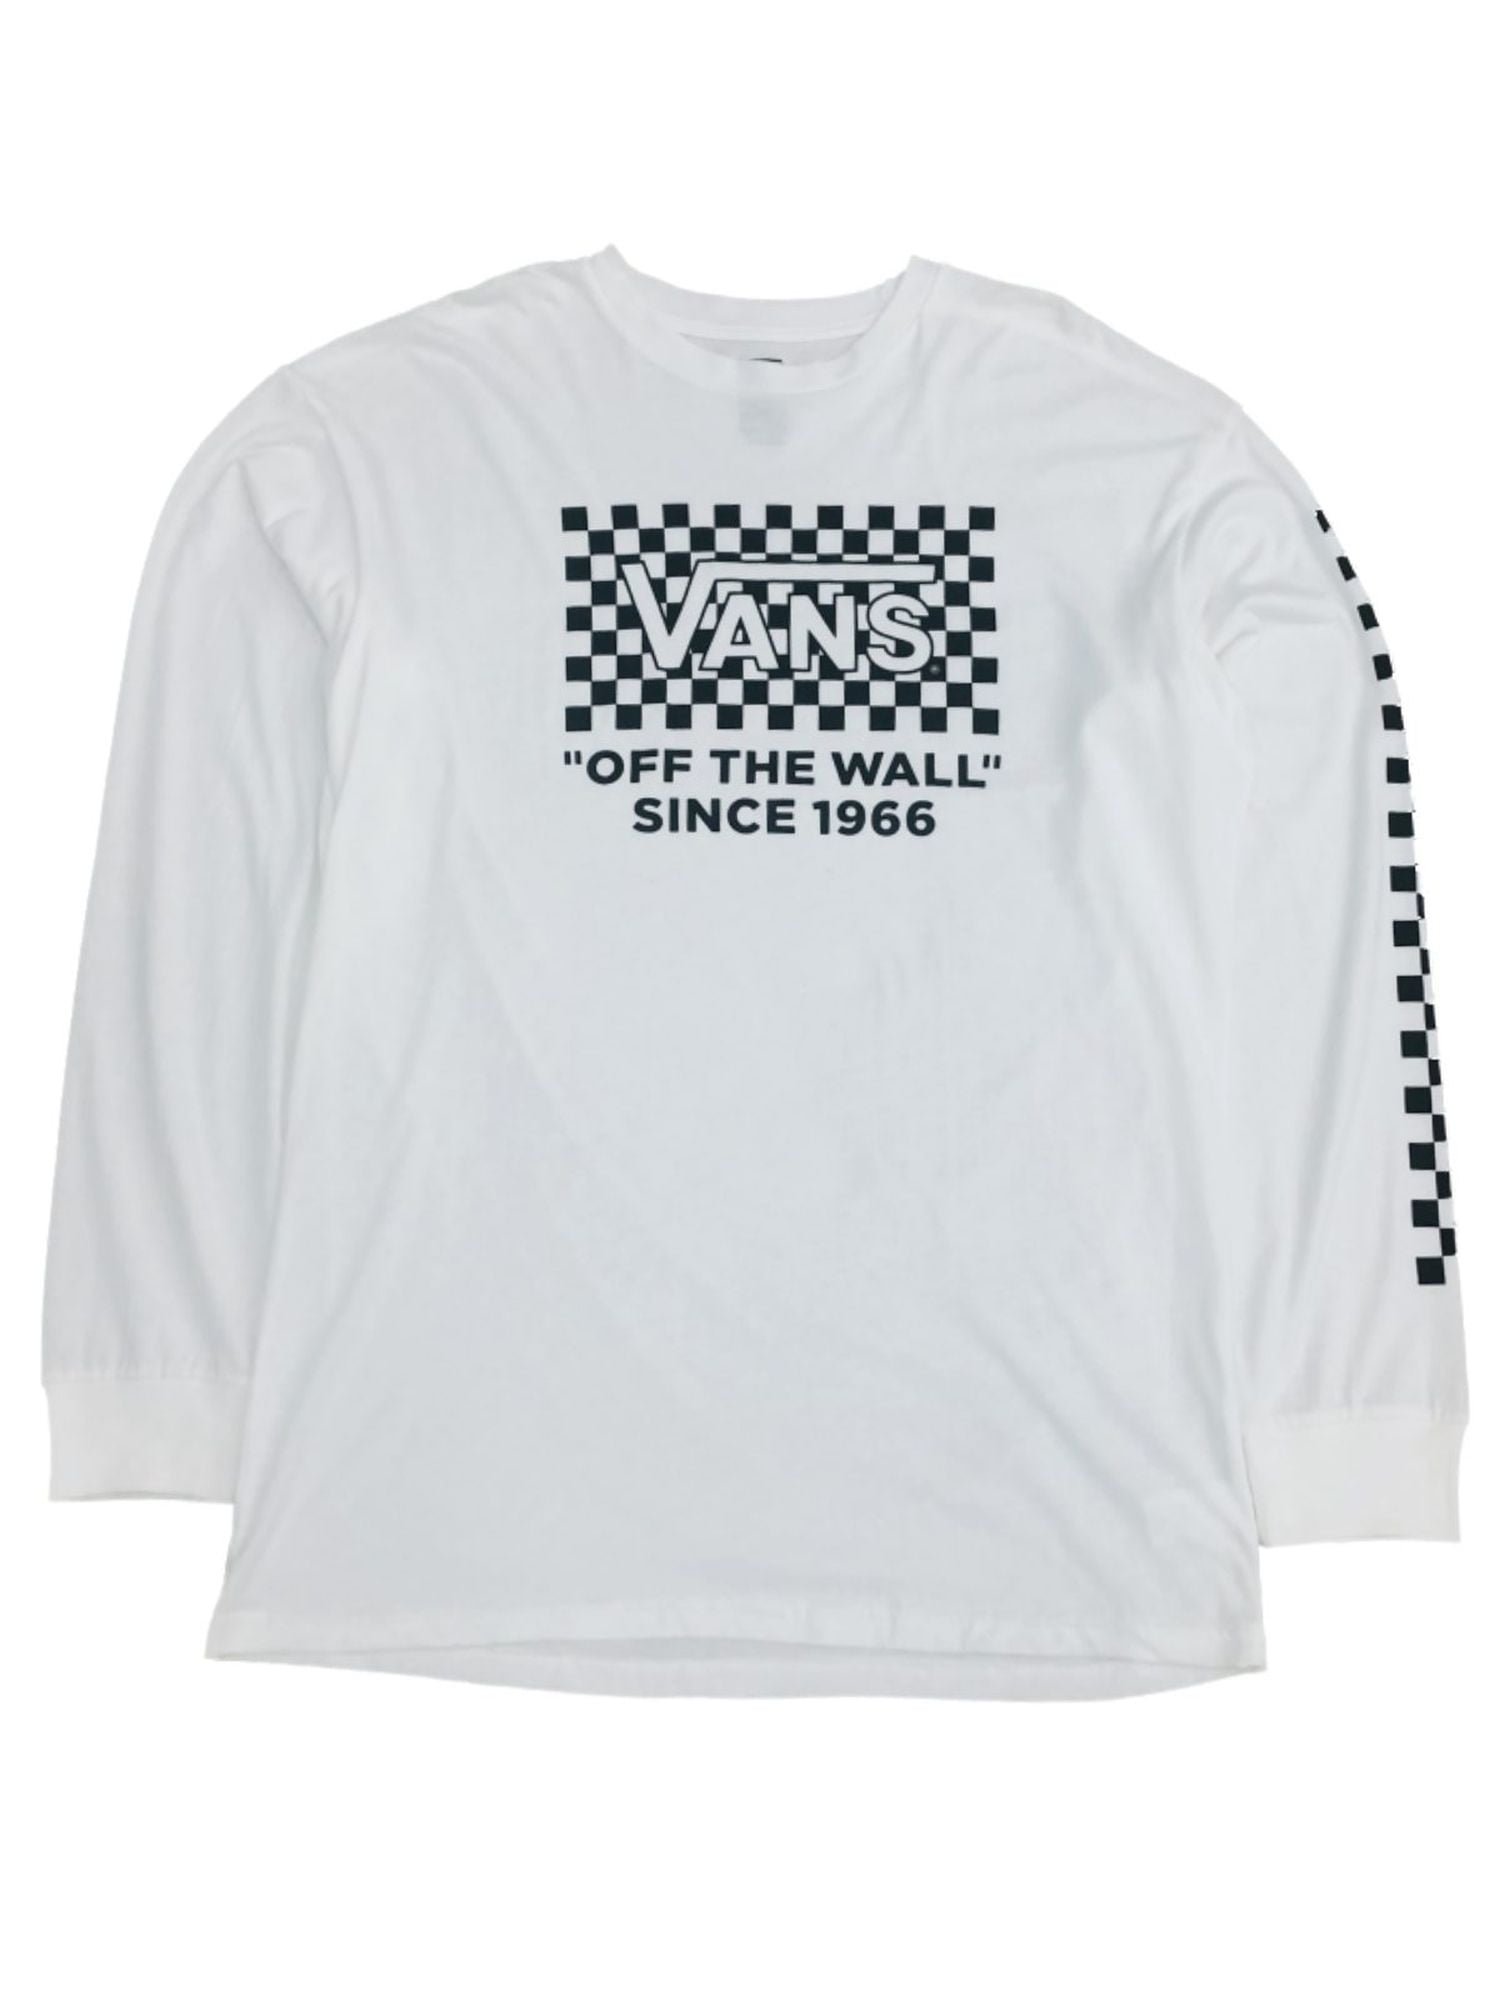 Mens Vans Off The Wall Since 1966 White Long Apparel Large - Walmart.com